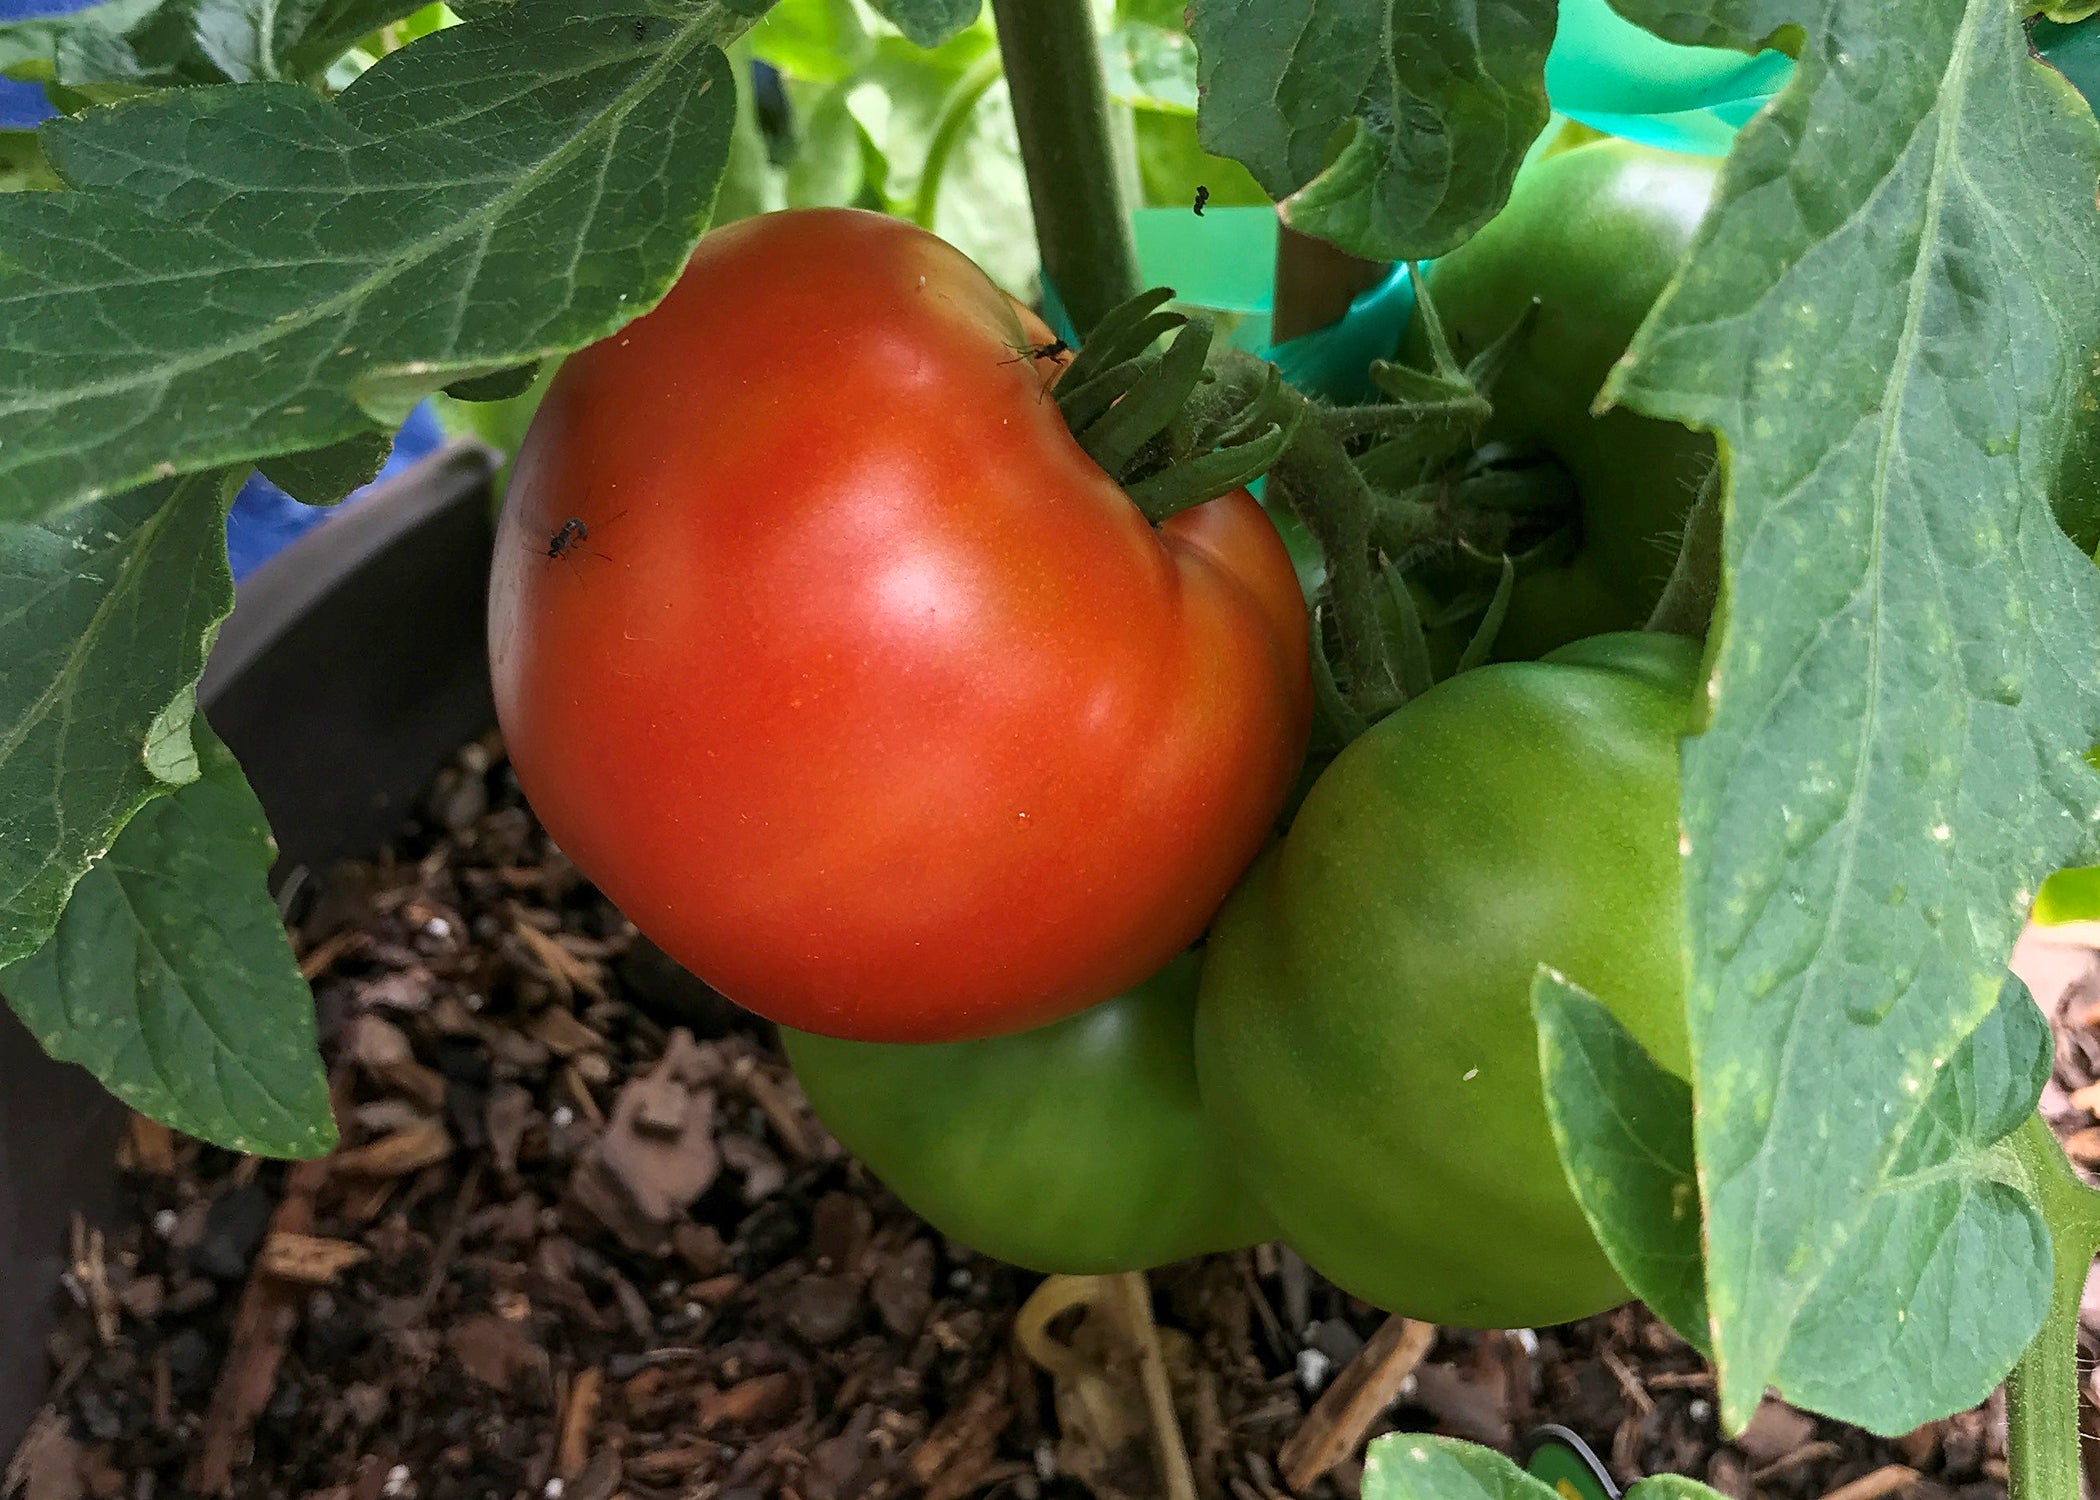 A large red tomato is next to green tomatoes.